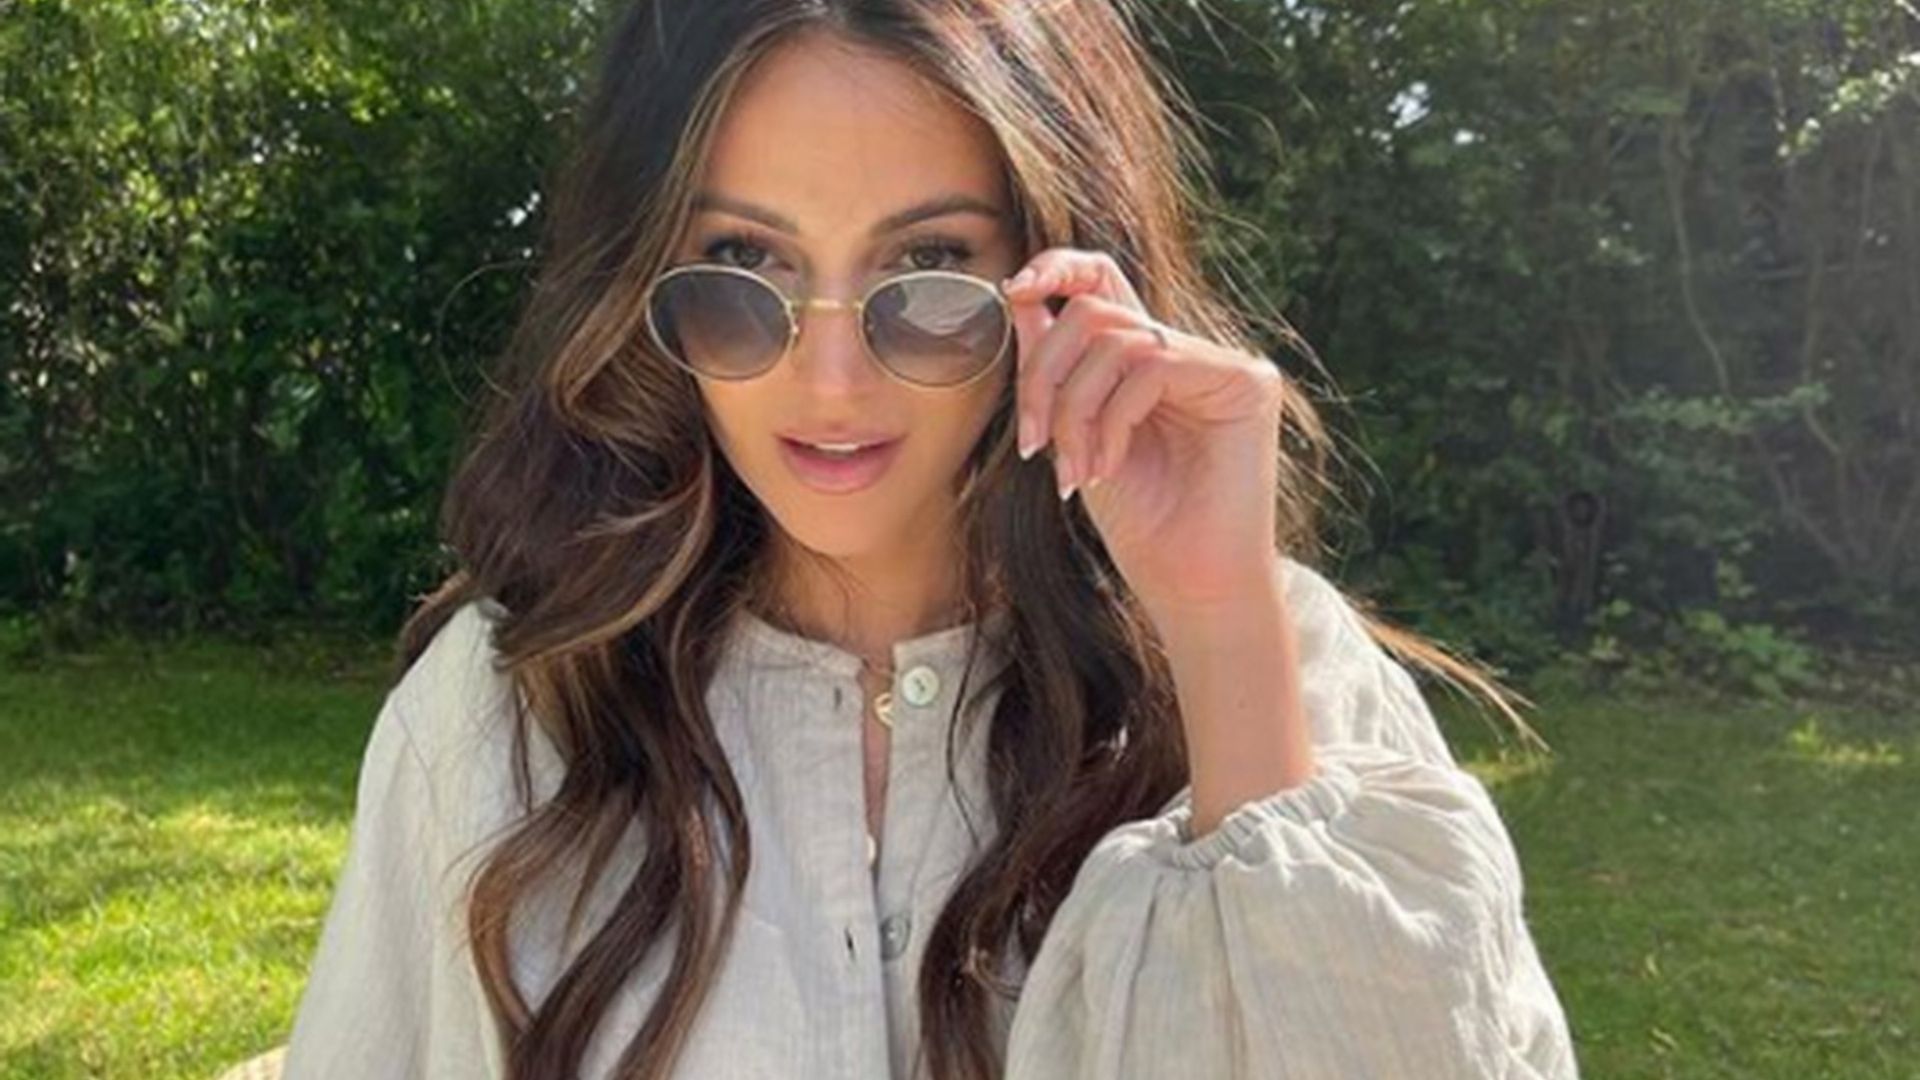 Michelle Keegan just styled her classic white linen shirt in the